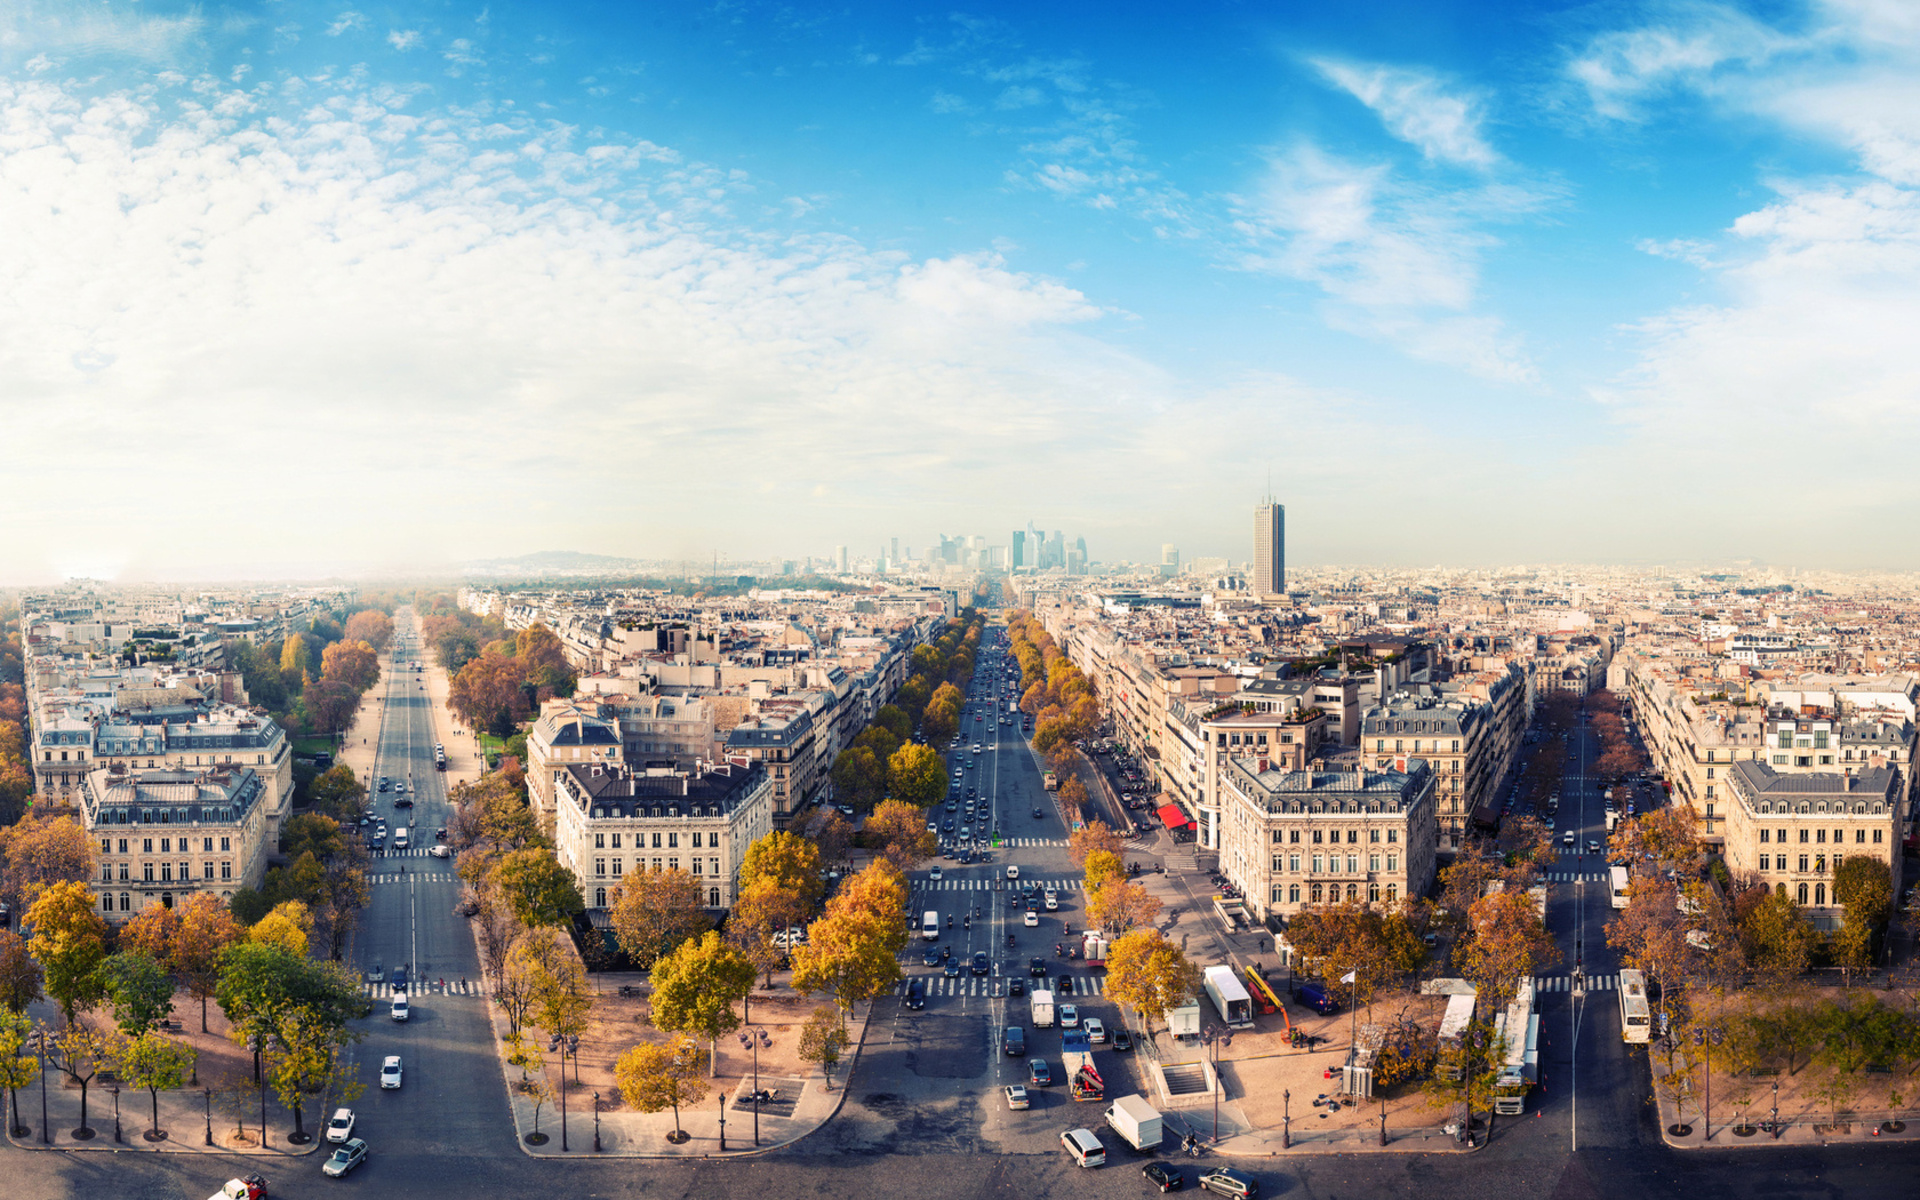 paris, France, Cities, Architecture, Buildings, Skyscrapers, Sky, Clouds, Scenic, View, Panorama, Autumn, Fall, Seasons, Trees, Cars, Vehicles, Traffic, People, Photography Wallpaper